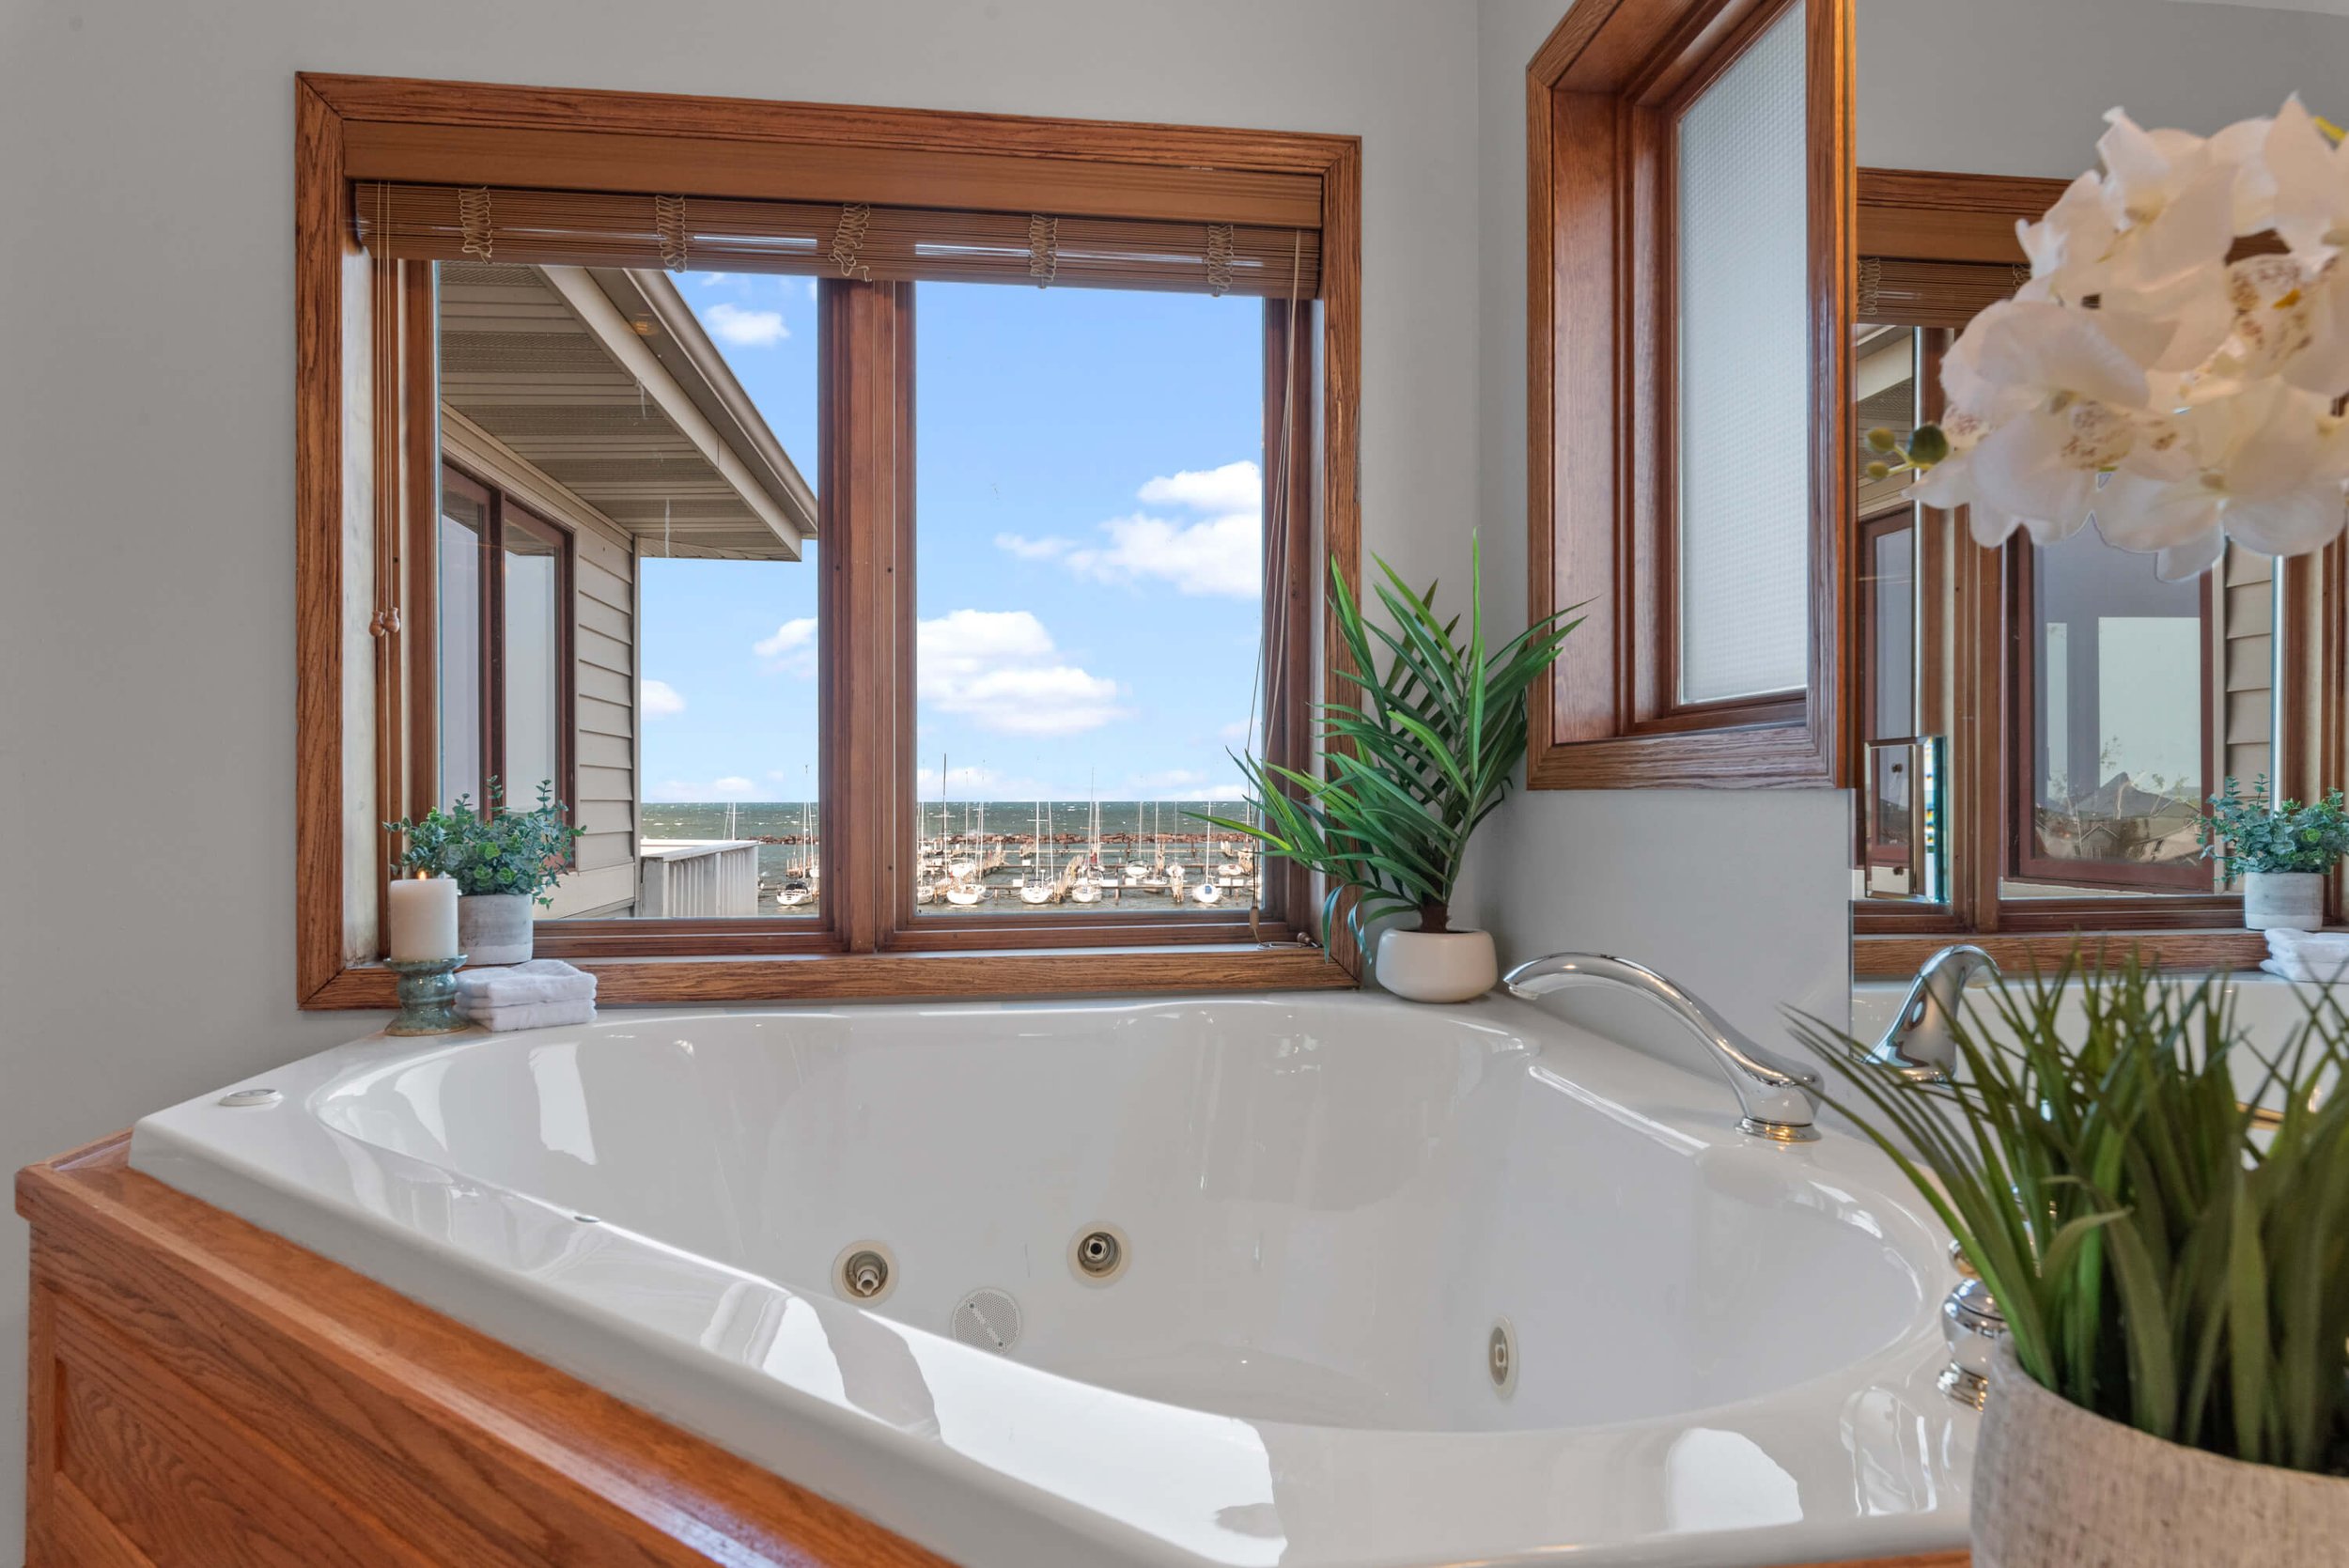 Whirlpool Tub with a View!